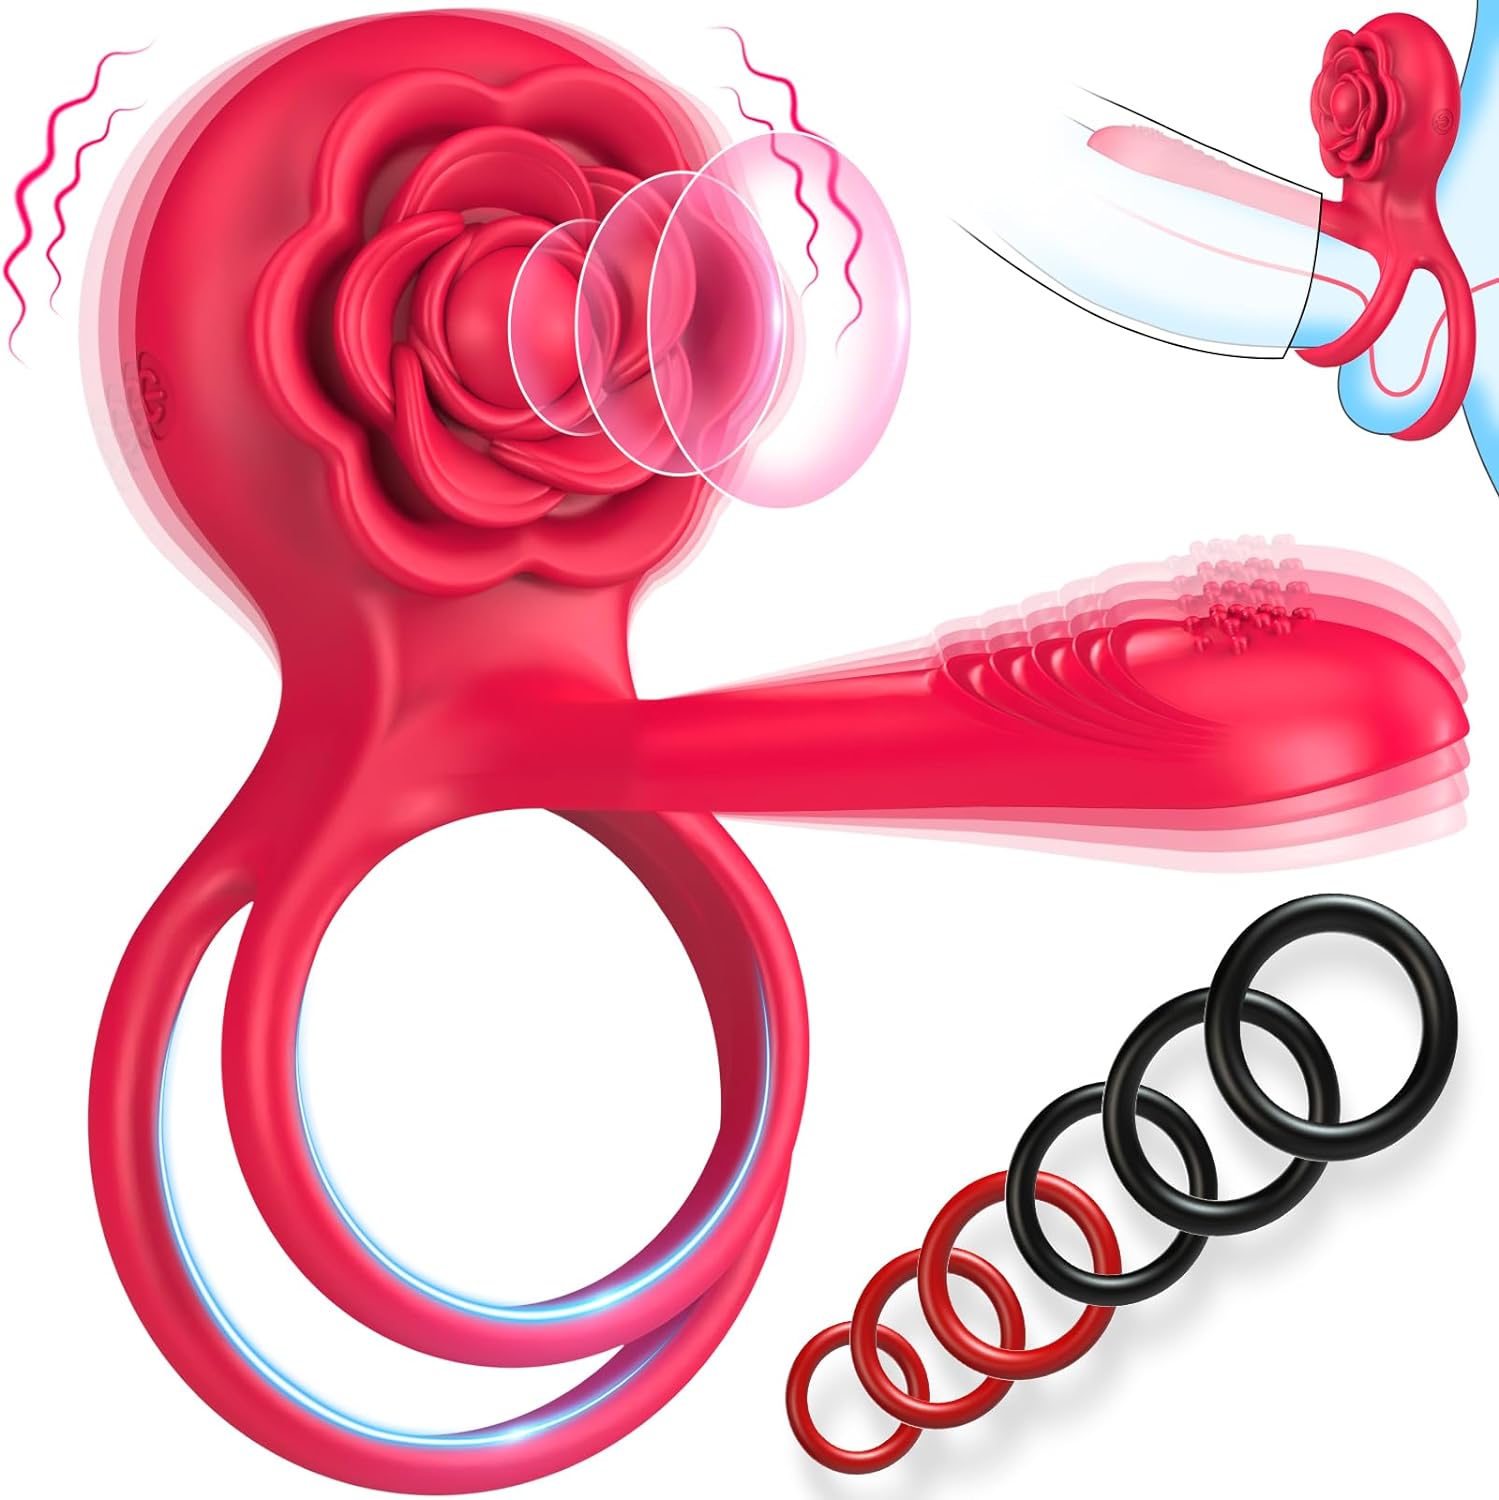 Vibrating Cock Ring Sex Toys，Double Penis Rings Adult Rose Toy with 10 Vibration Modes & 6 Extra Sex Rings, Penis Vibrator G-spot Clitoral Stimulator for Men Couple